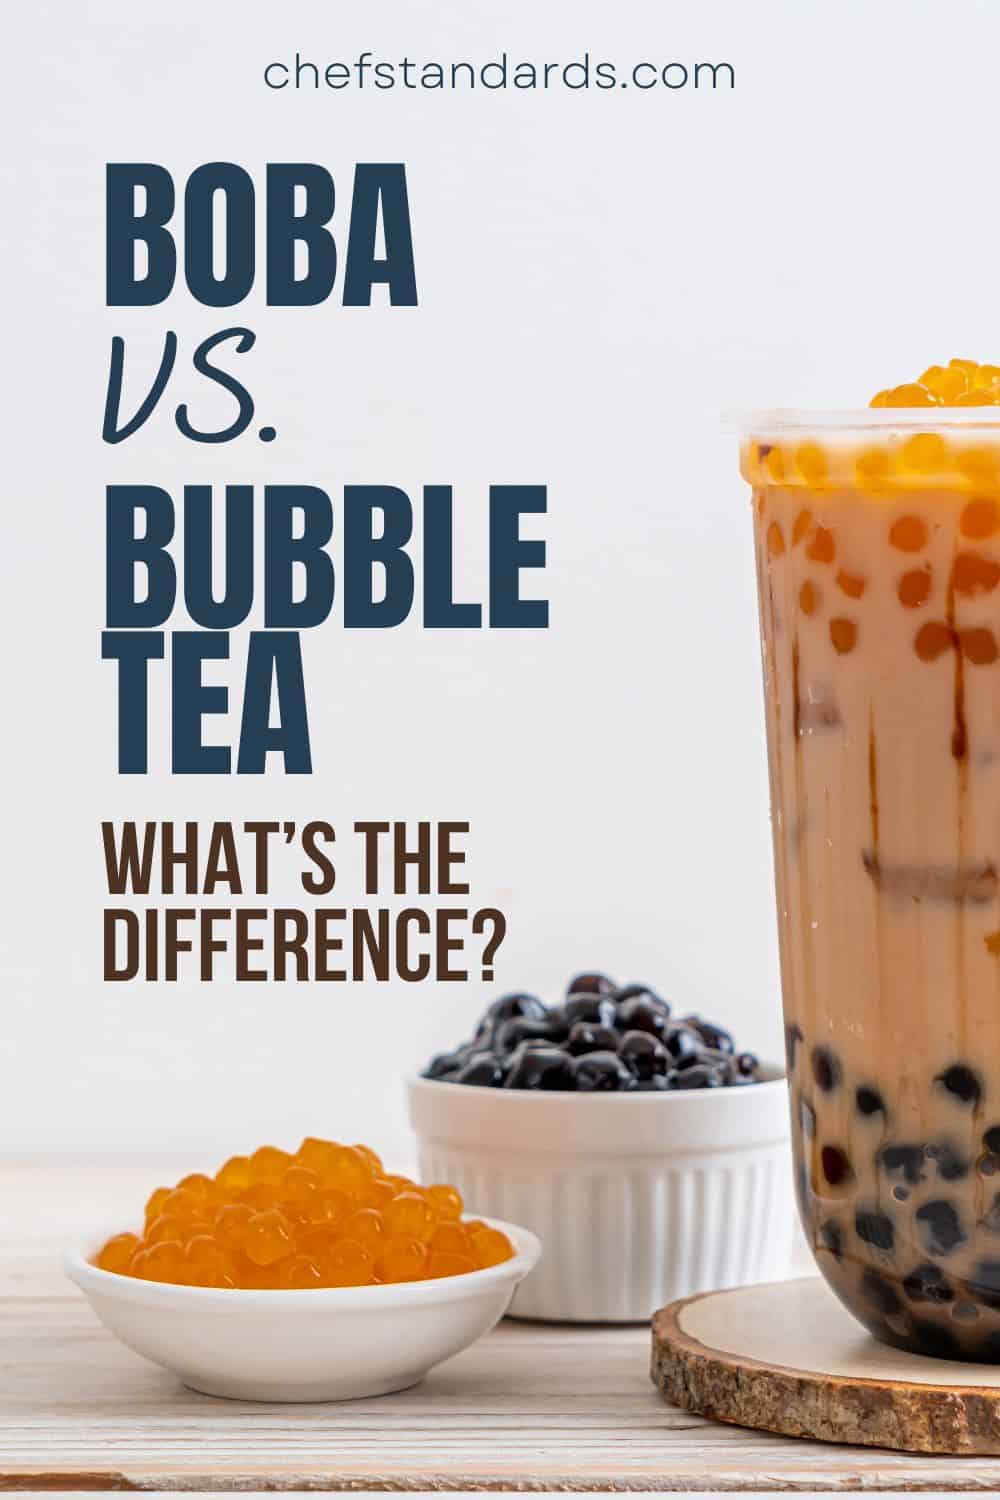 Is There Any Difference Between Boba Vs Bubble Tea